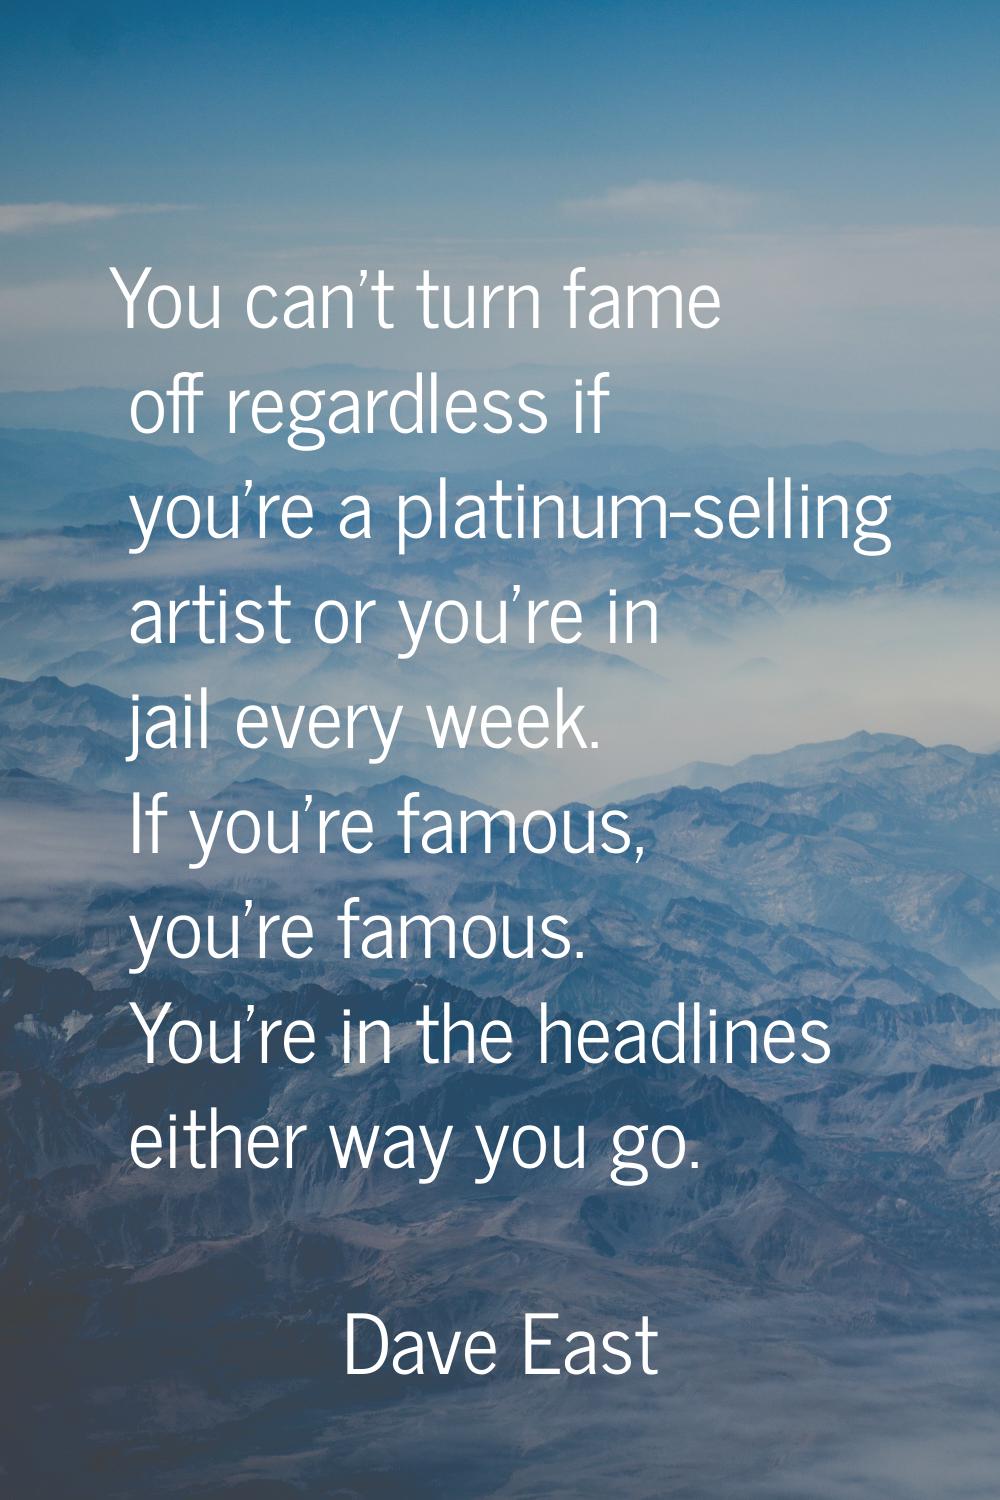 You can't turn fame off regardless if you're a platinum-selling artist or you're in jail every week